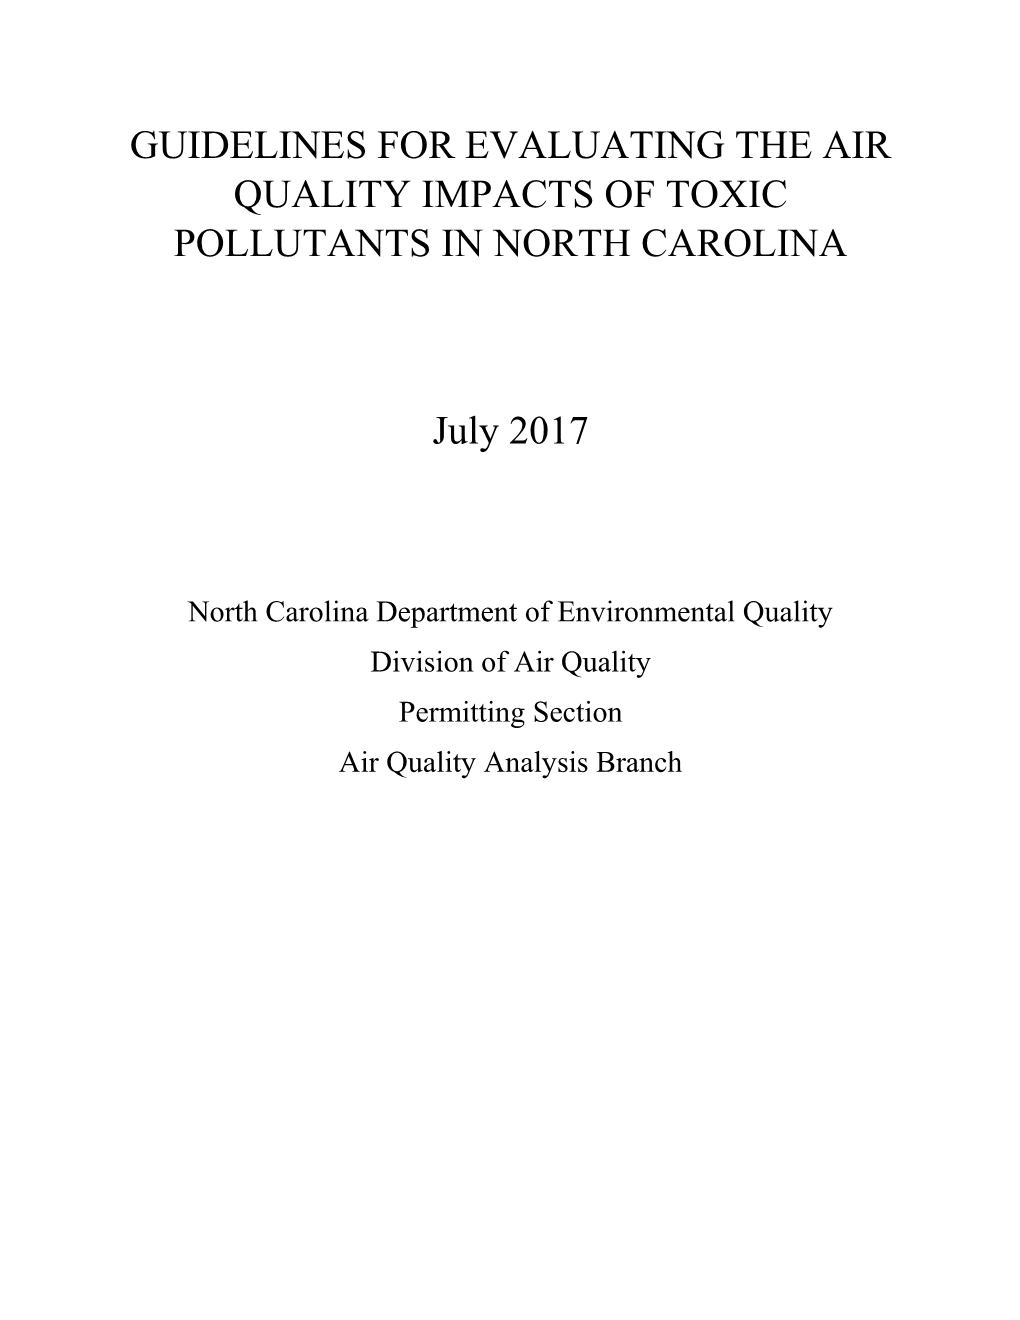 Guidelines for Evaluating the Air Quality Impacts of Toxicpollutants in North Carolina